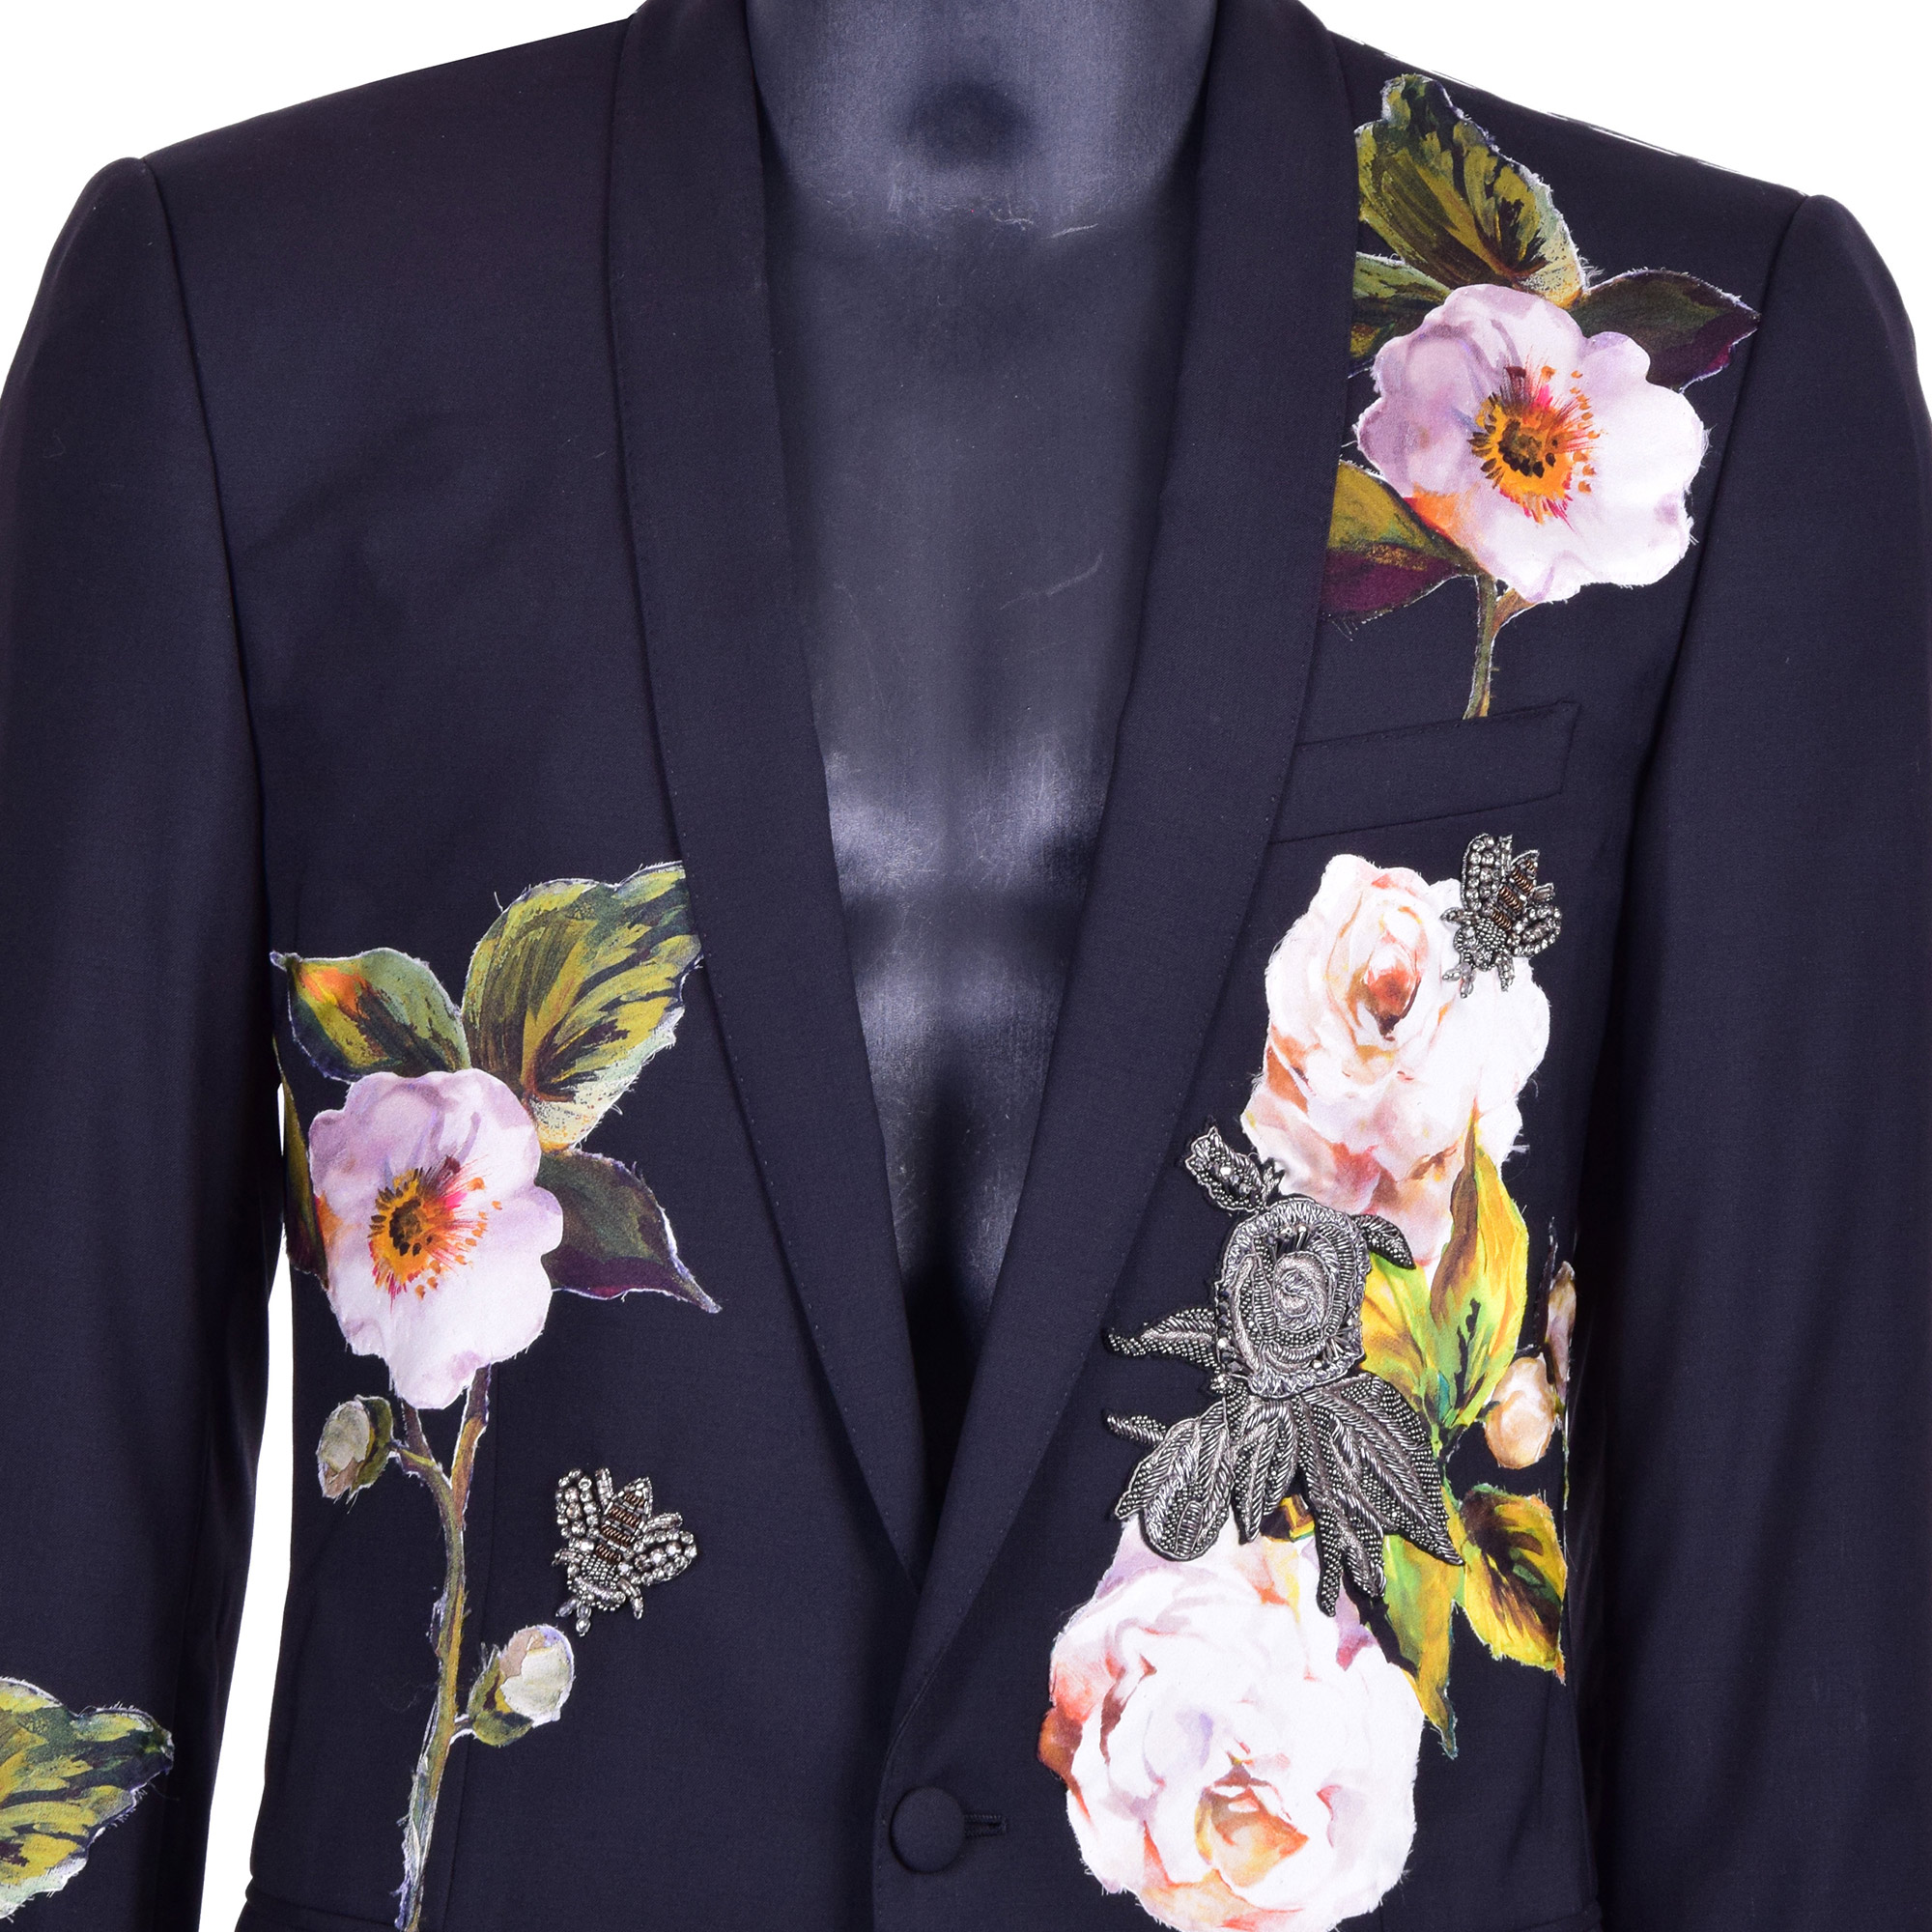 Dolce & Gabbana GOLD Bees Embroidered Suit Black | FASHION ROOMS